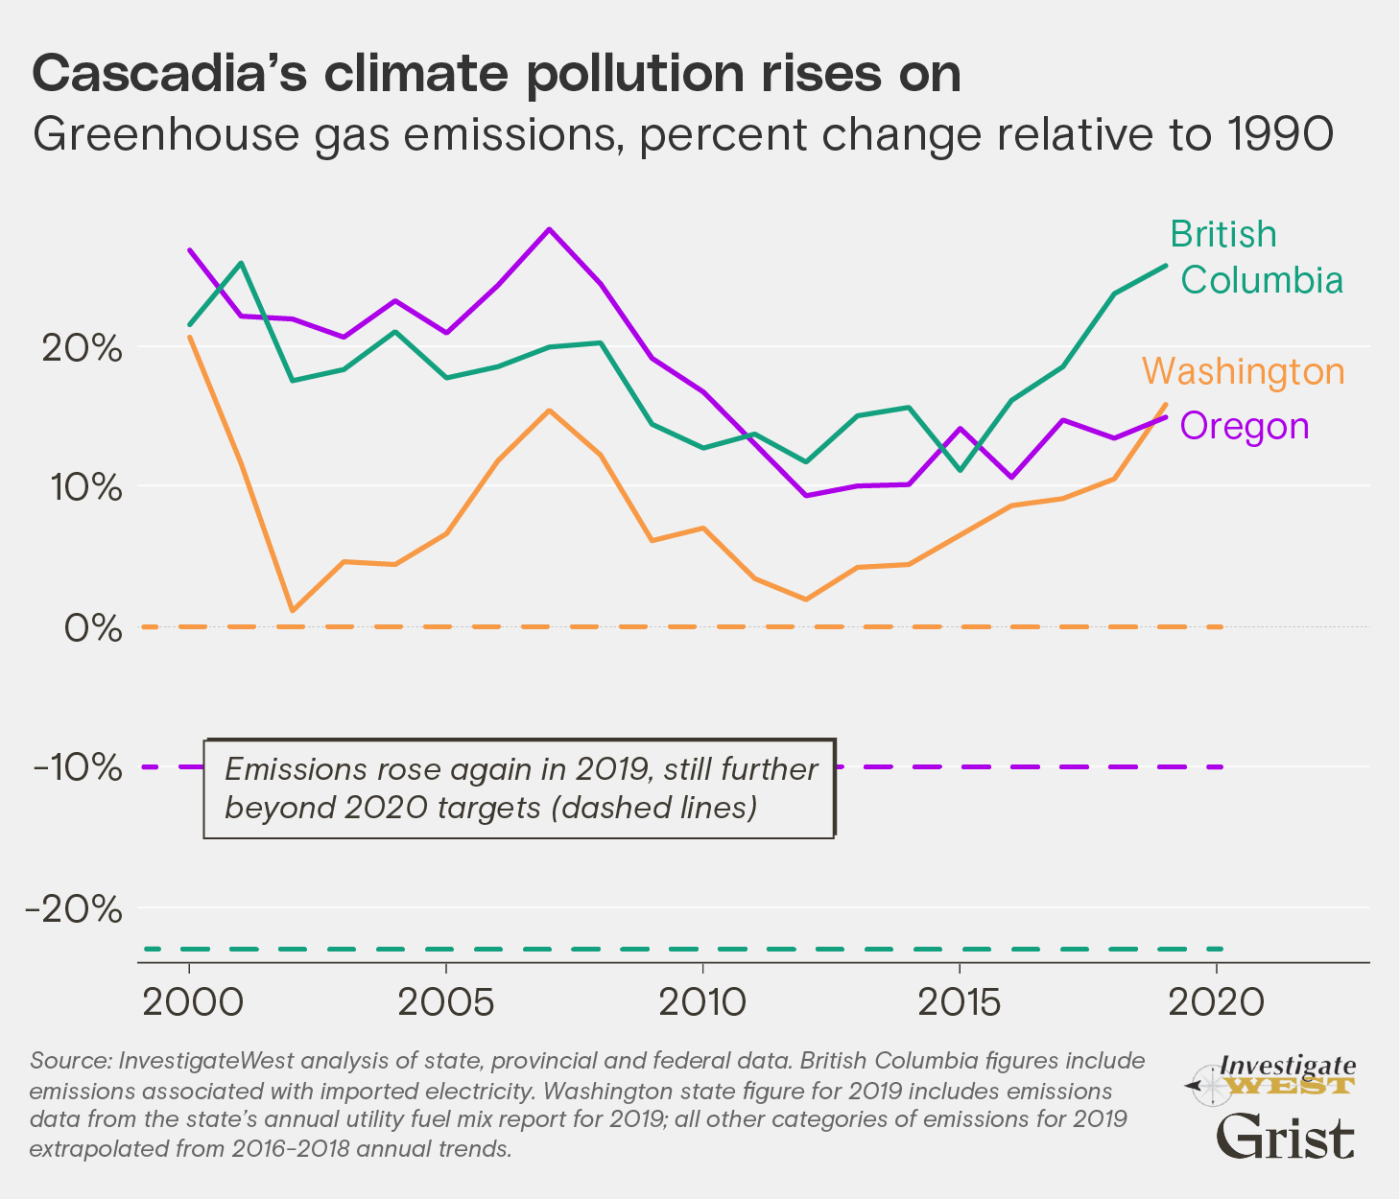 Climate polution in Cascadia (British Columbia, Washington, and Oregon continues to rise). Emissions rose again in 2019, still further beyond 2020 targets.